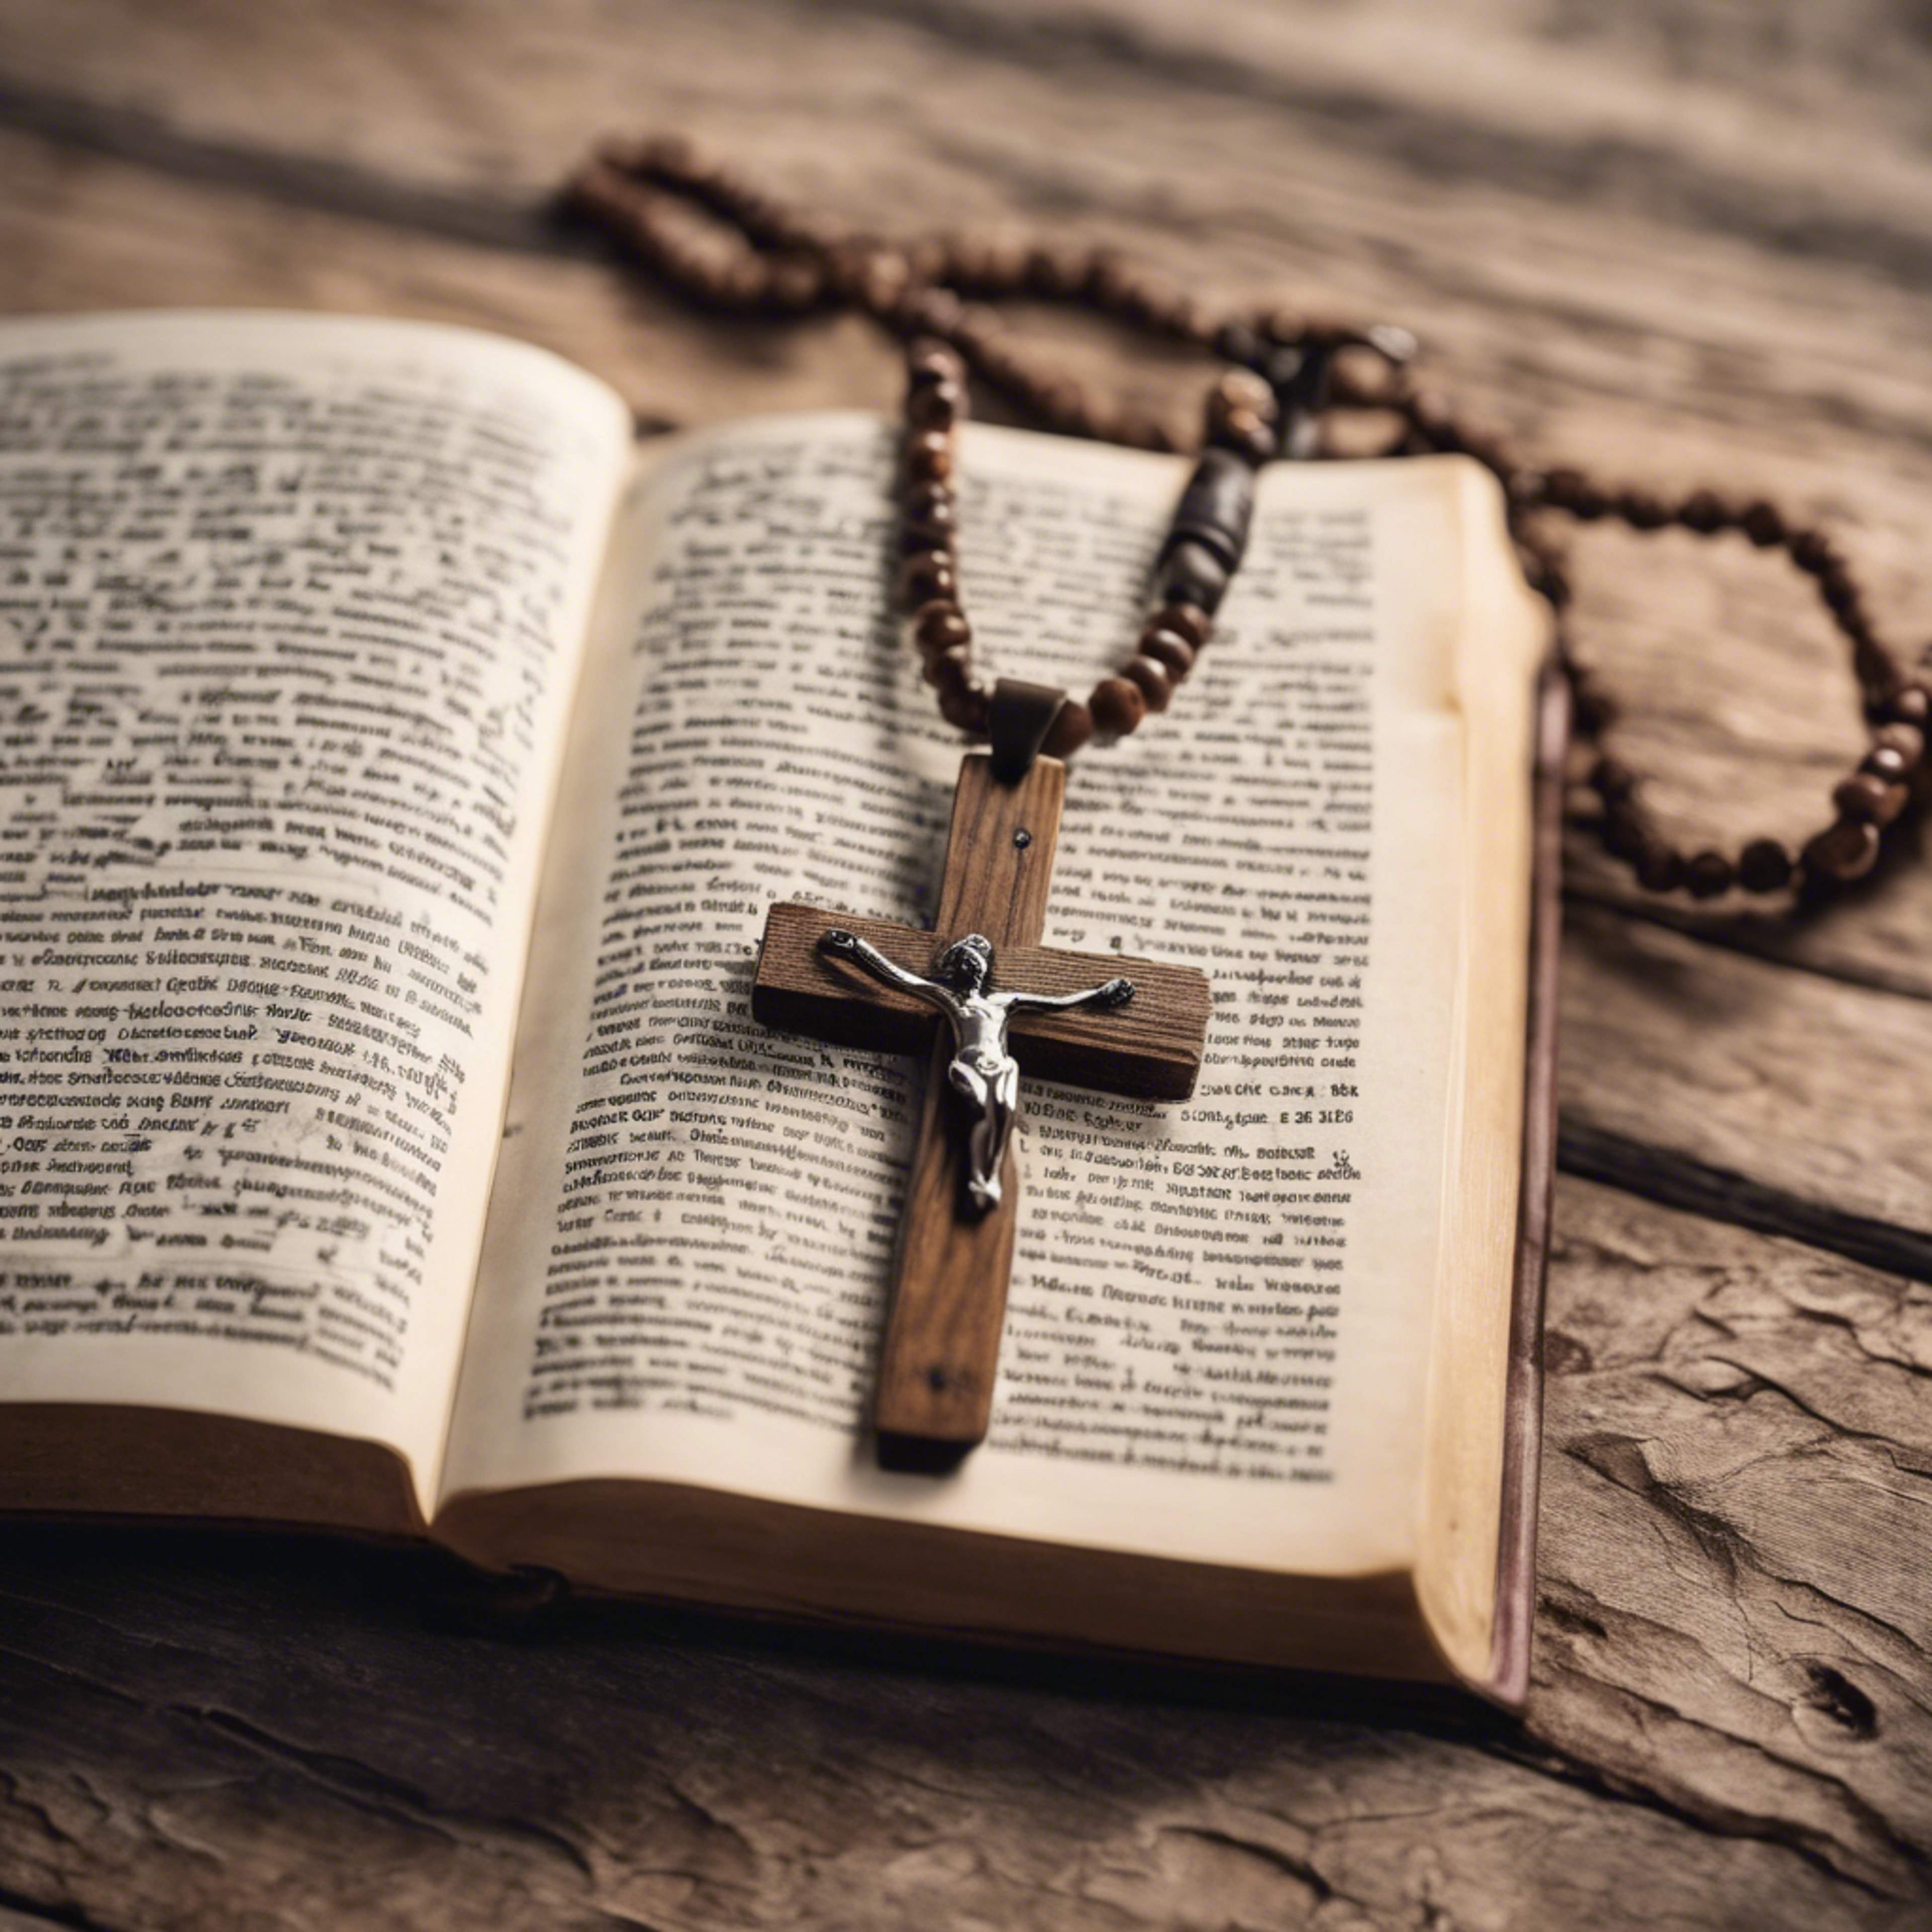 A rustic wooden cross pendant, resting on an open Bible with highlighted verses. Hintergrund[546e5e84b1254317a8cf]